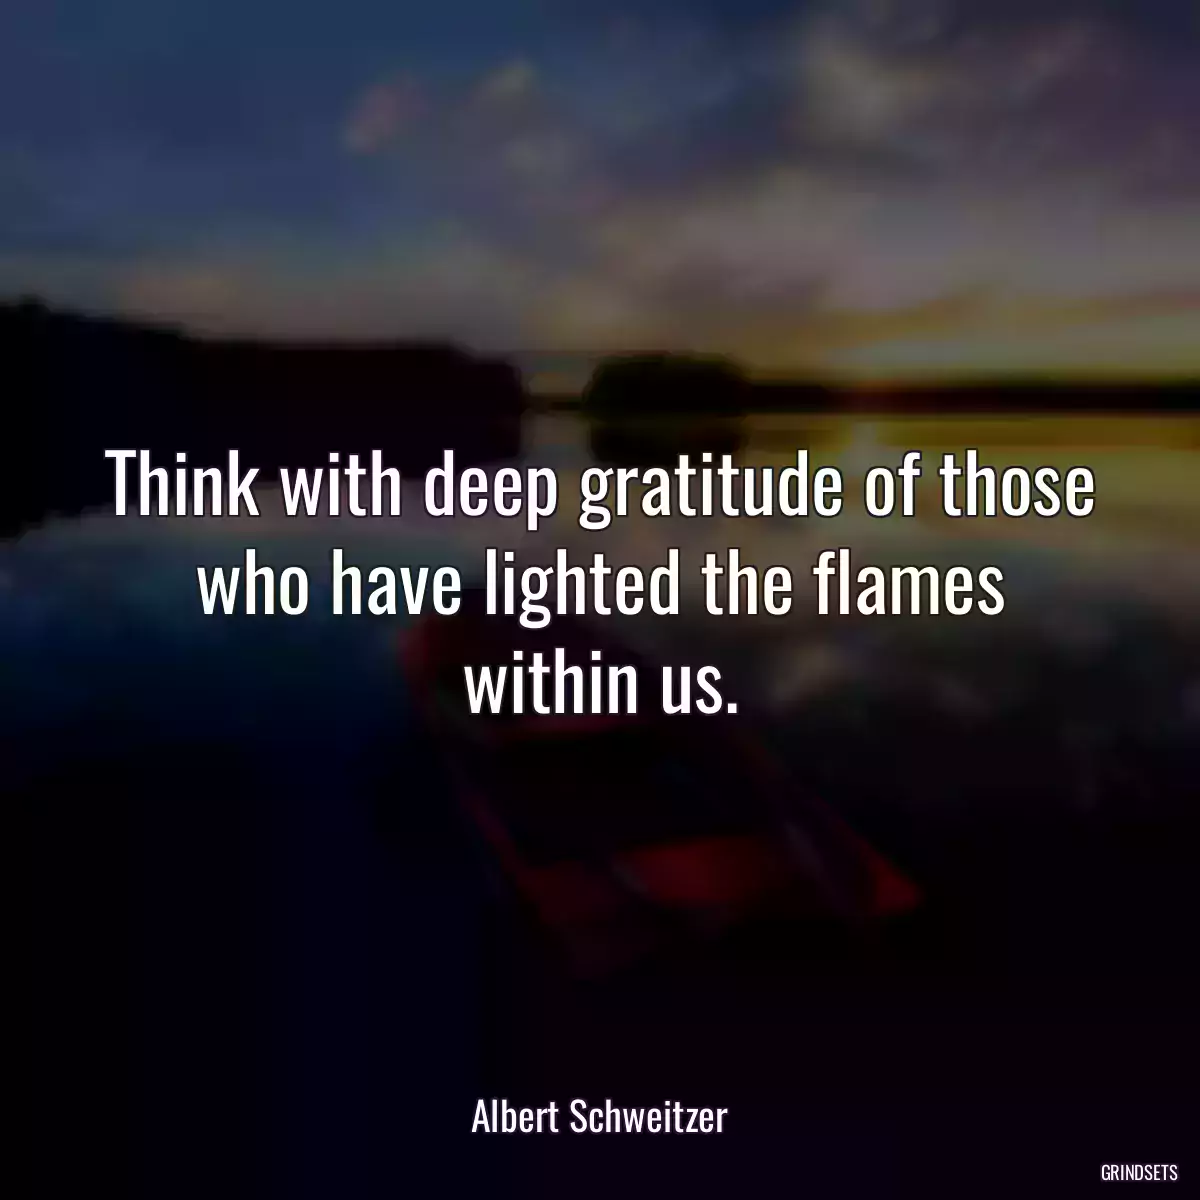 Think with deep gratitude of those who have lighted the flames within us.